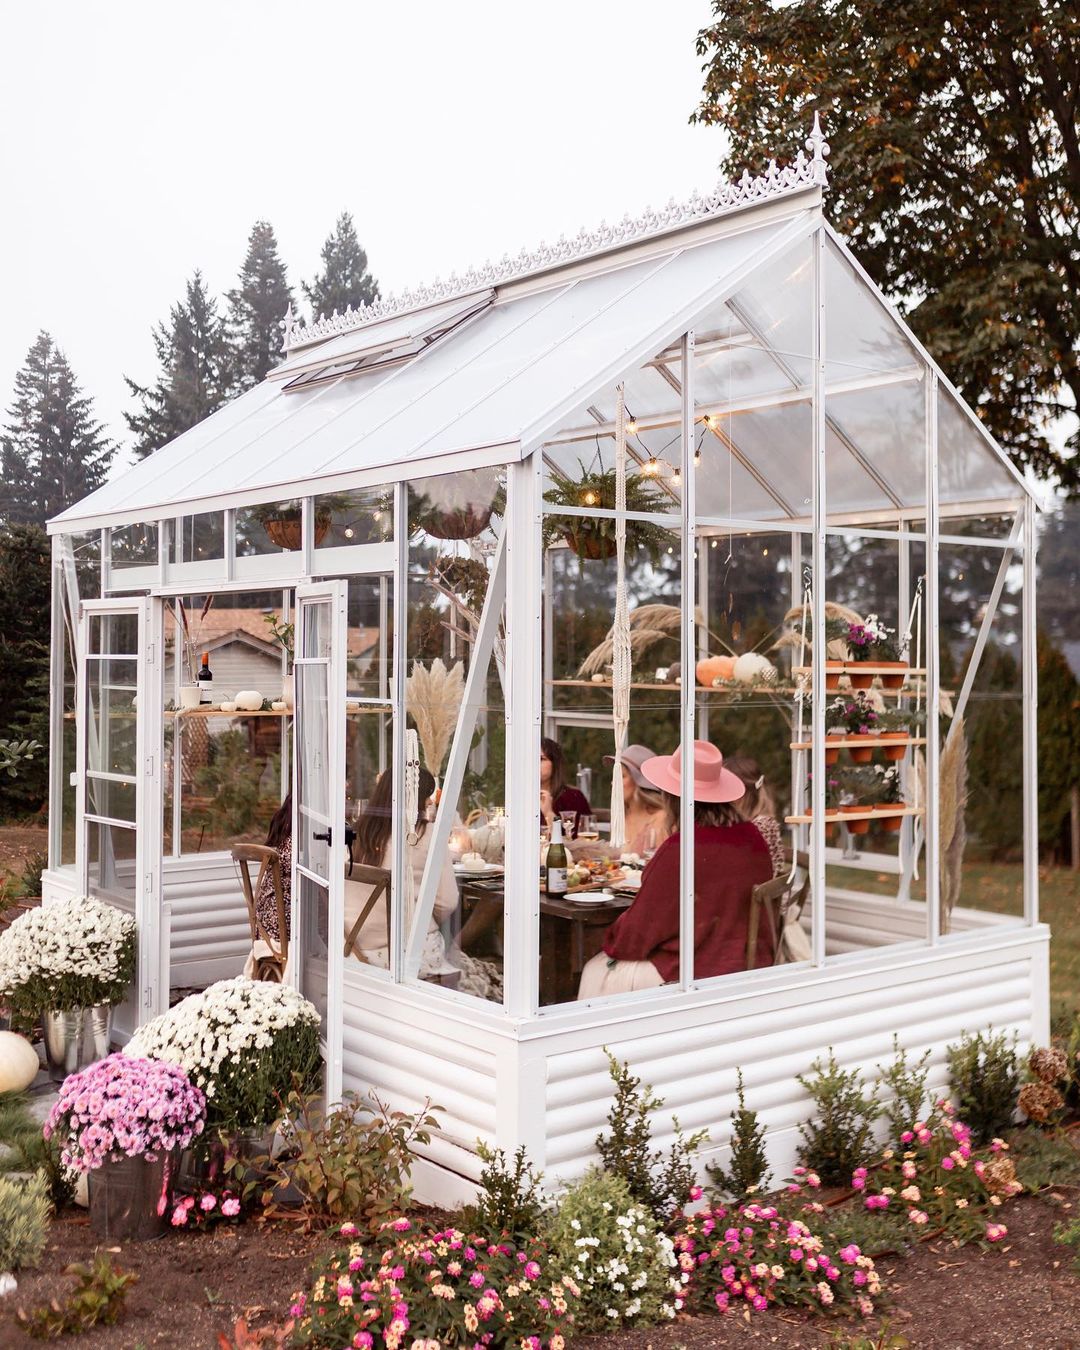 Greenhouse Style She Shed. Photo by Instagram user @emilyyew.co